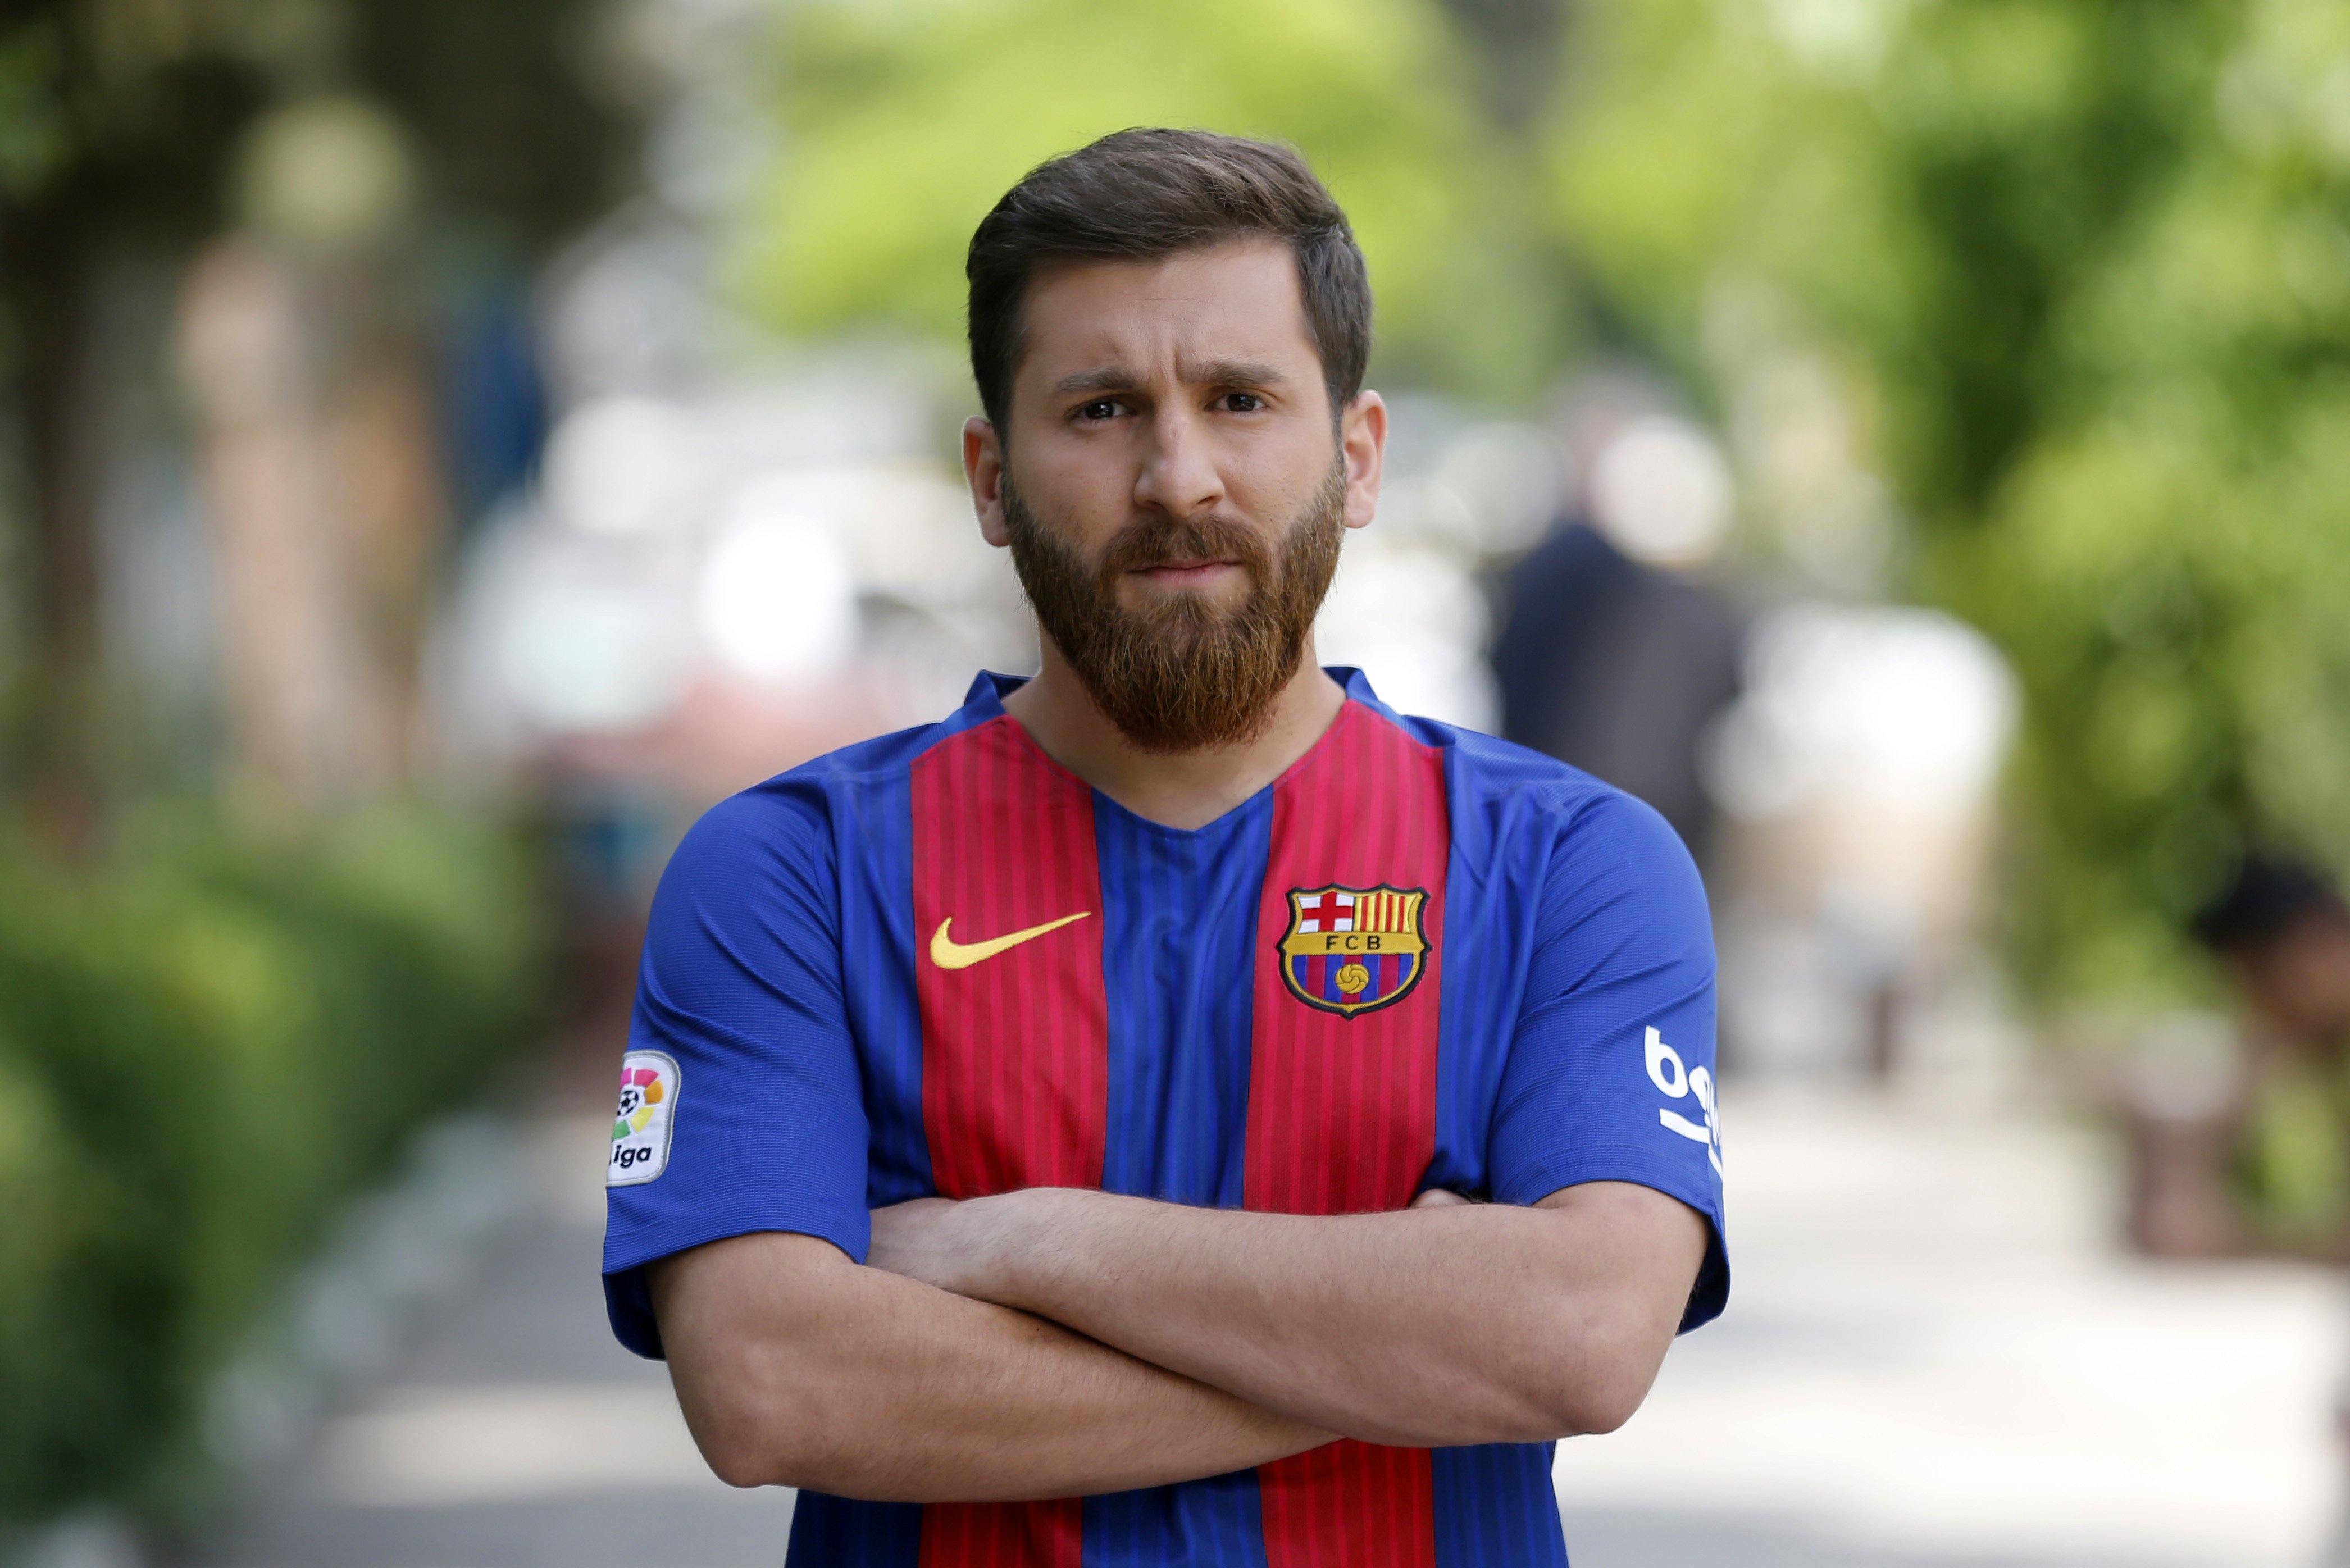 Student Looks So Much Like Lionel Messi Police Impounded His Car GettyImages 680292872